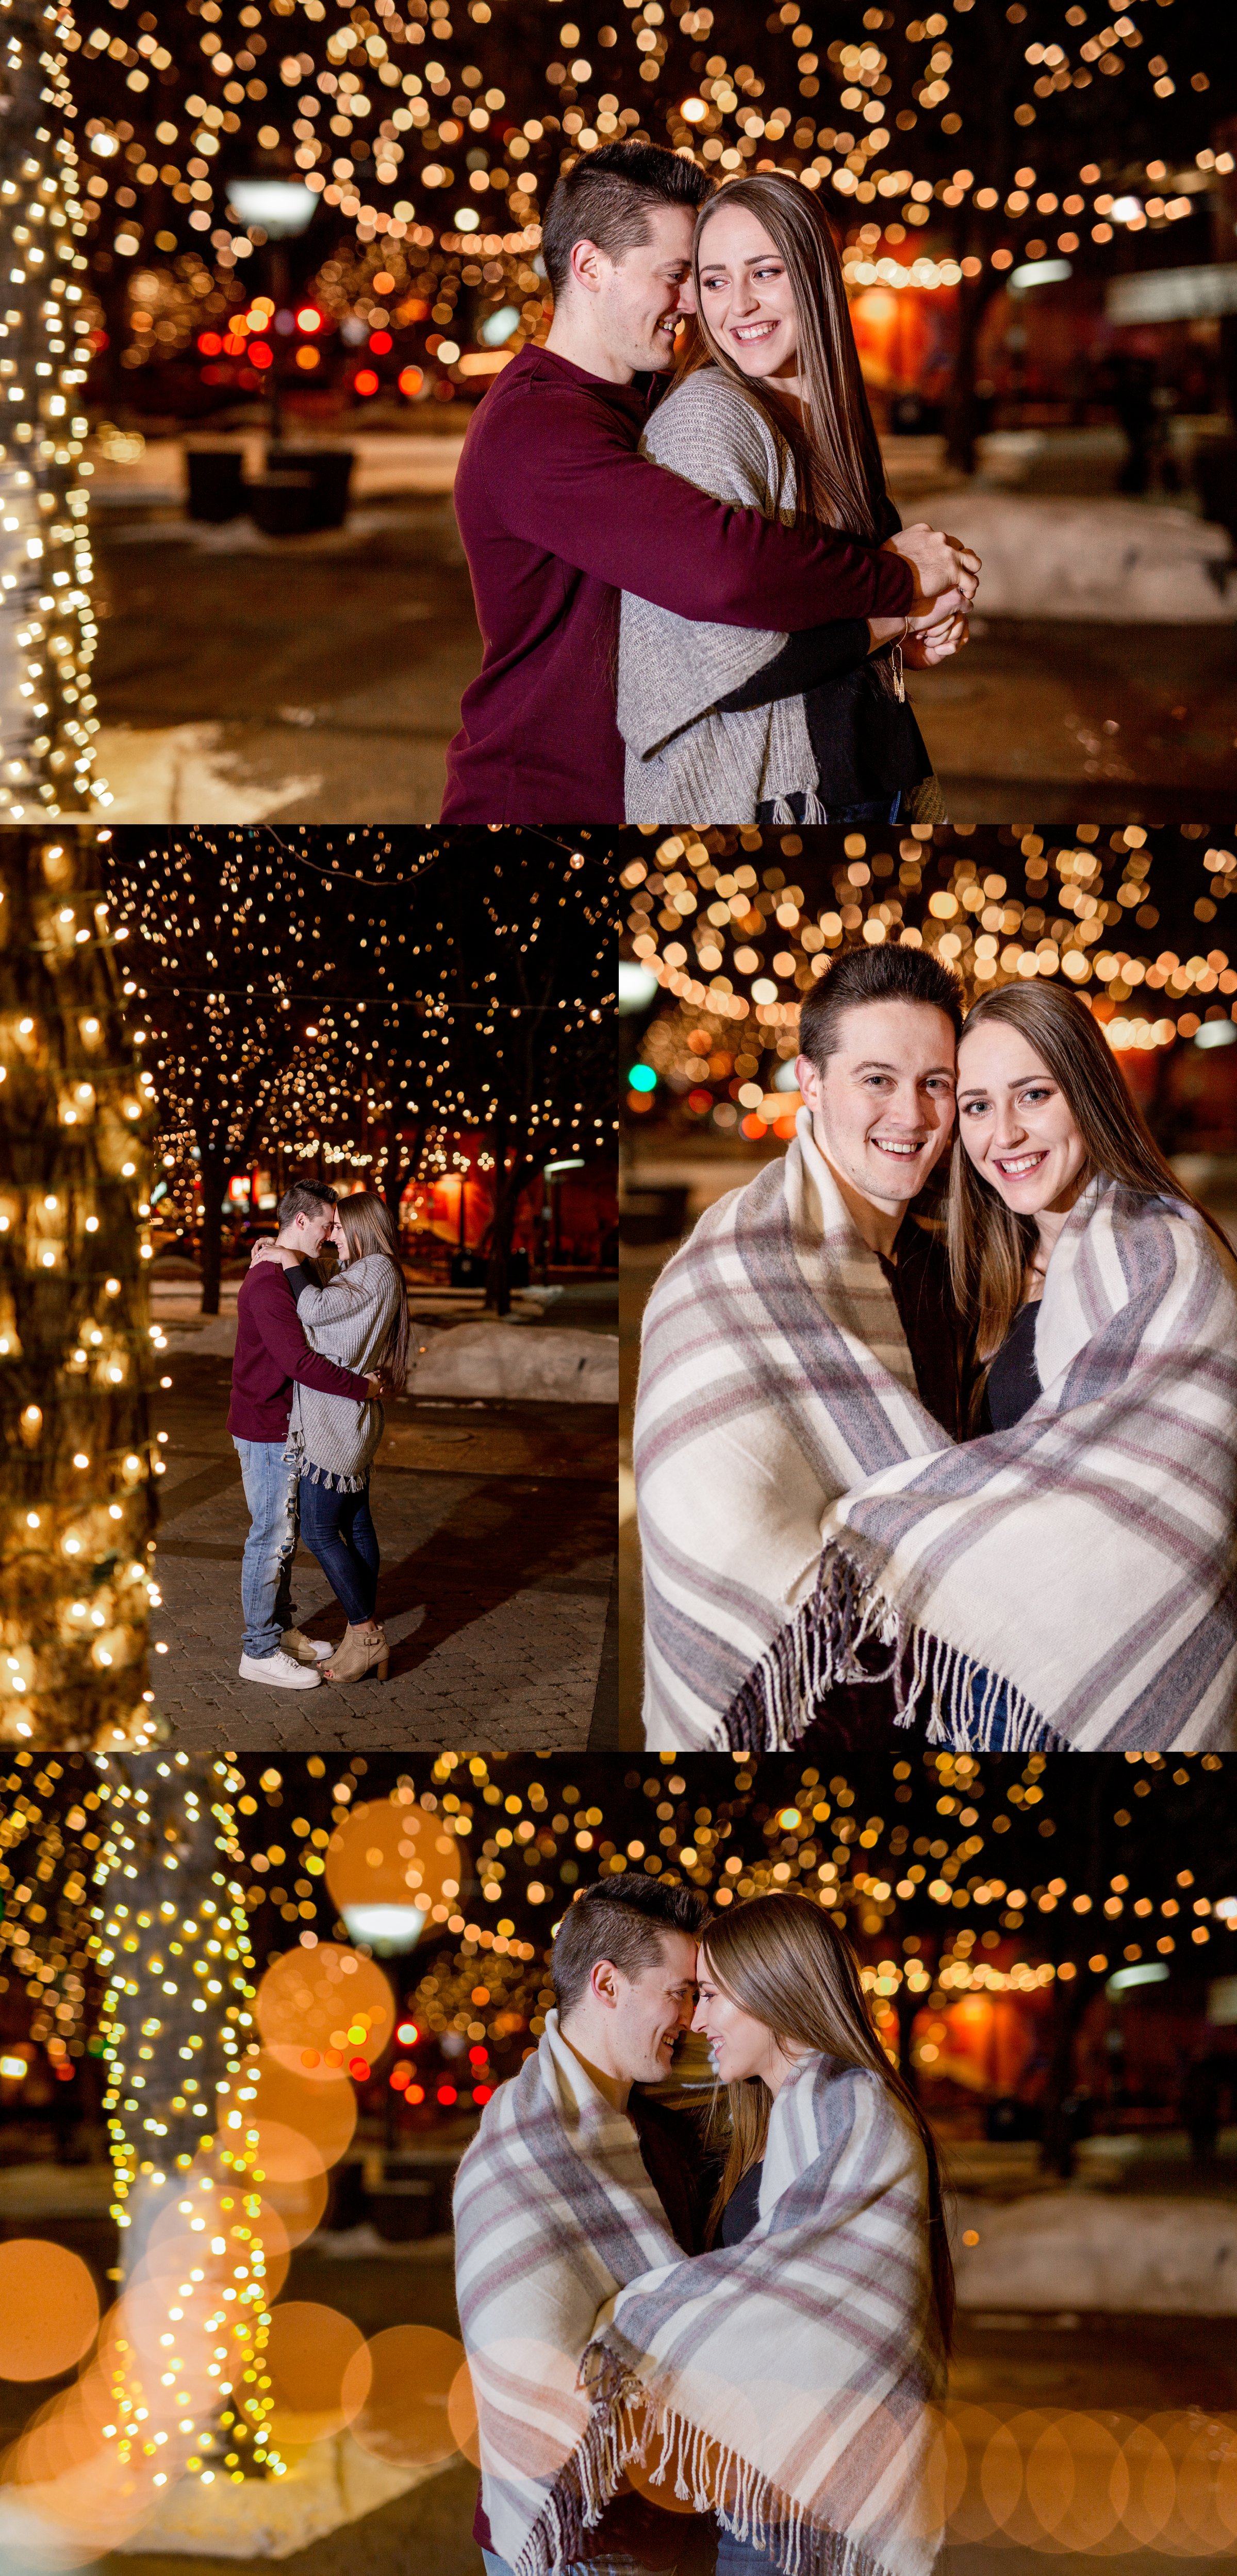 Engaged couple in downtown fort collins lights at night snuggling in a blanket